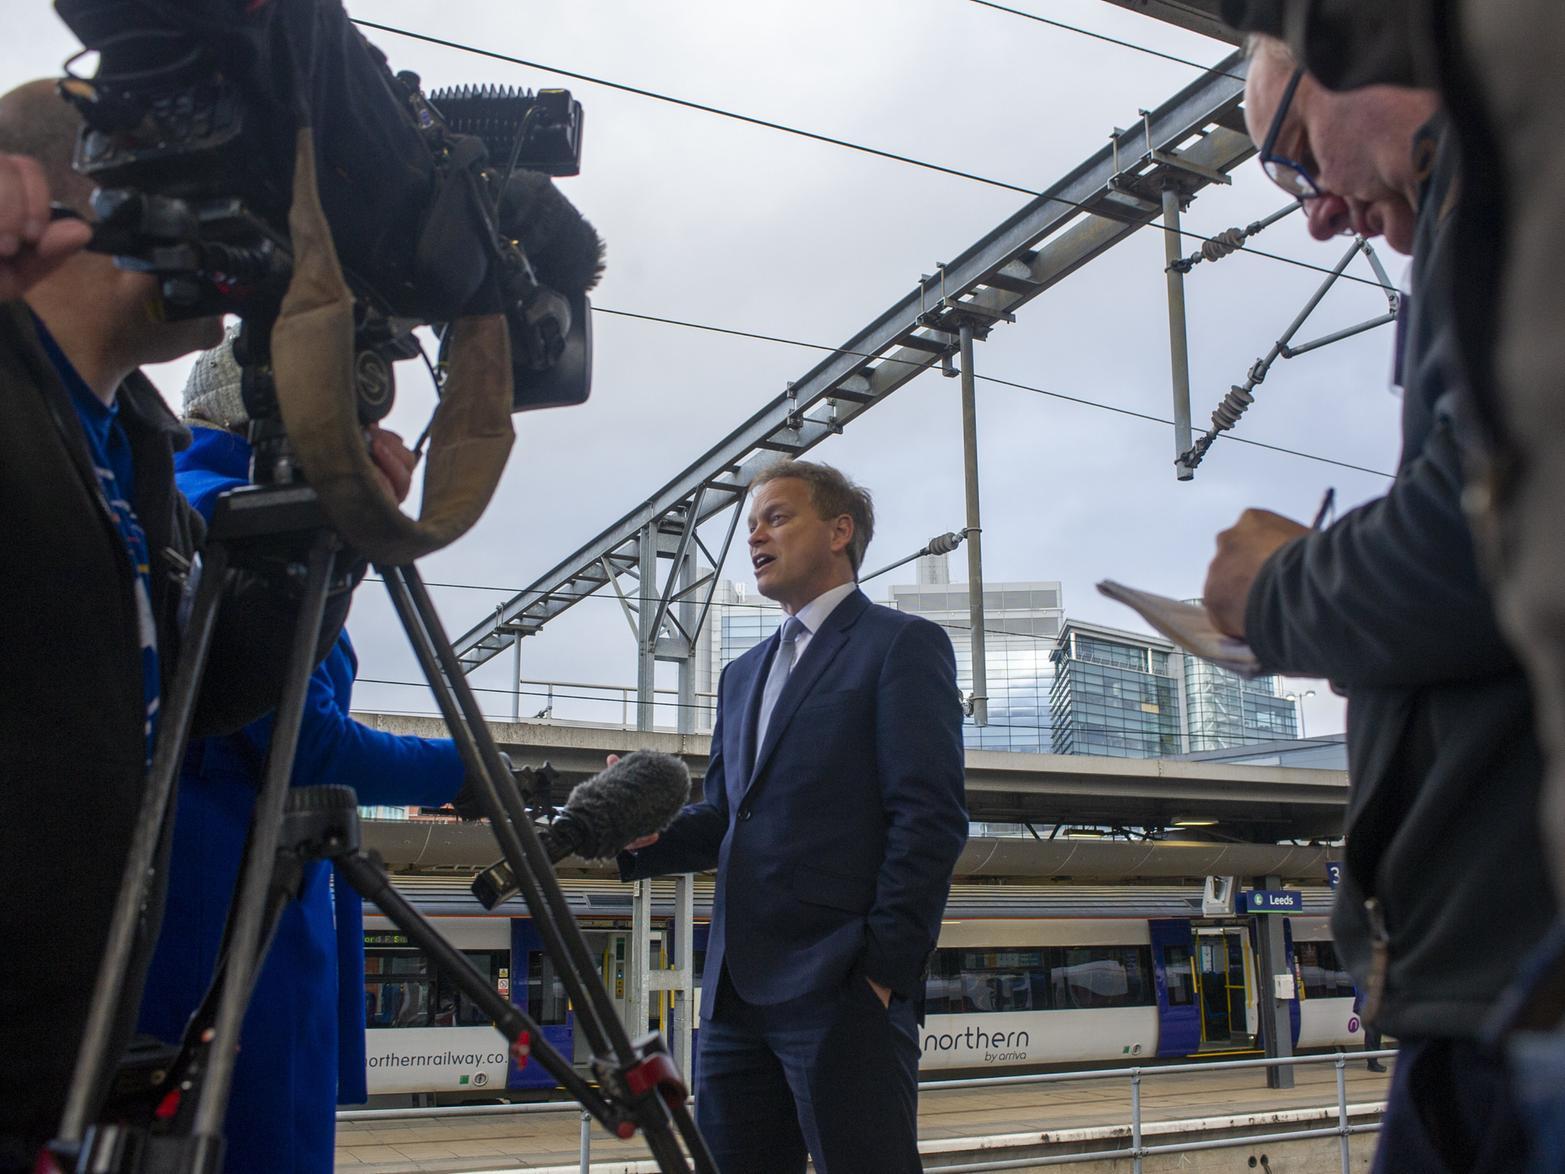 Transport Secretary Grant Shapps faces the cameras after his announcement about Northern.